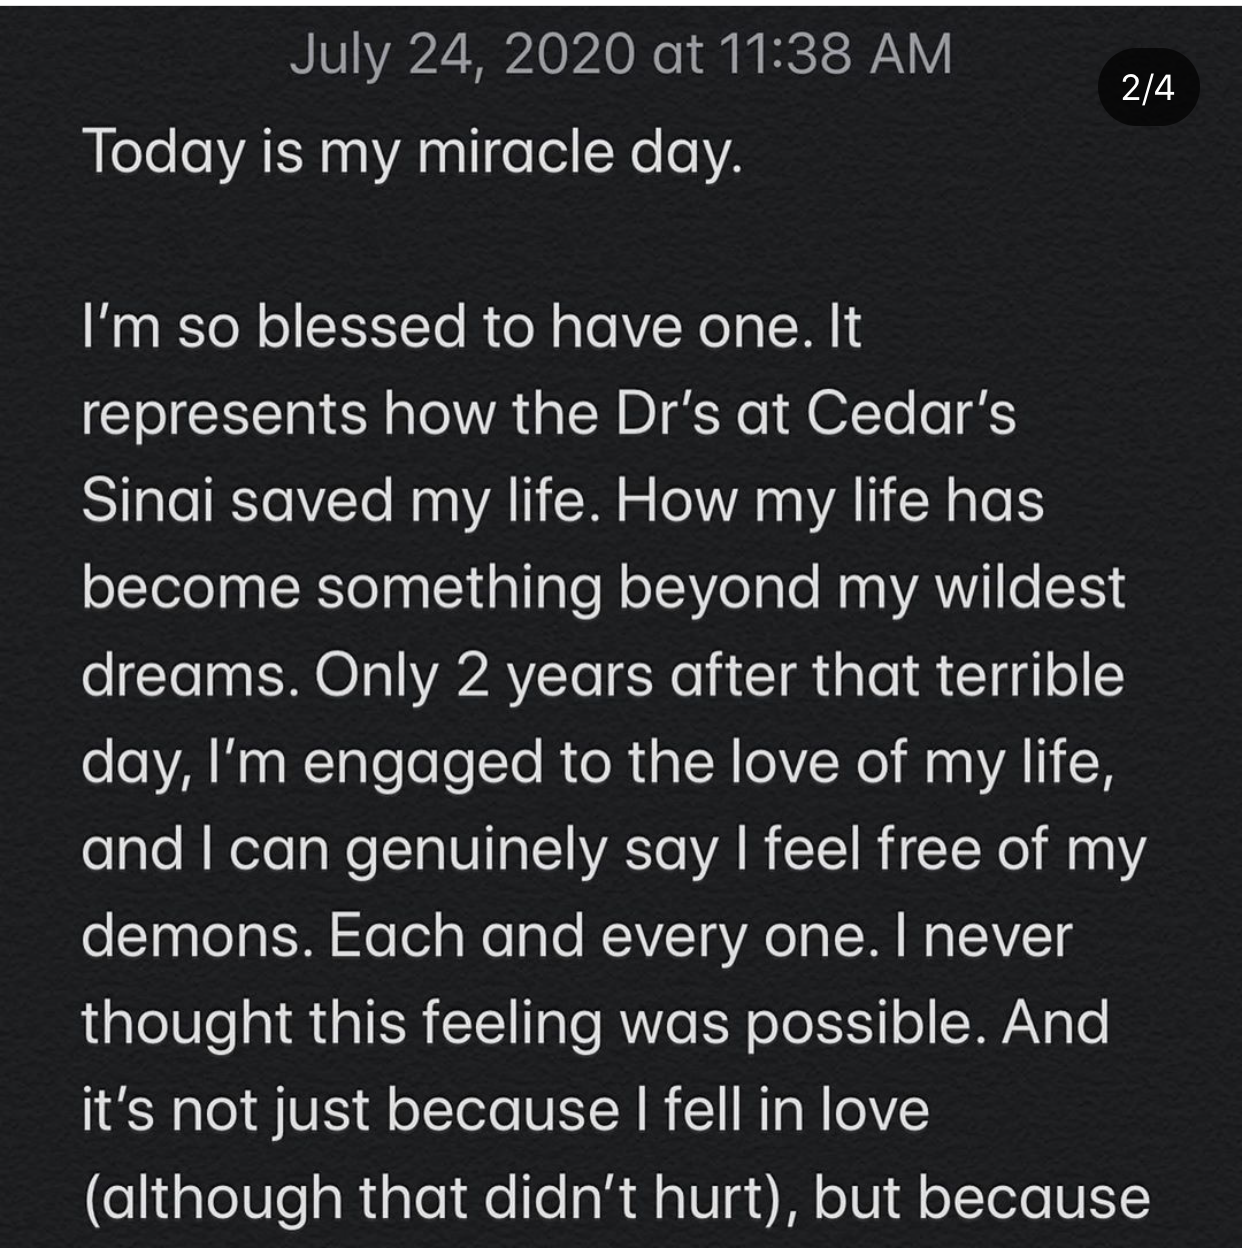 Screenshot of note Demi wrote about her miracle day